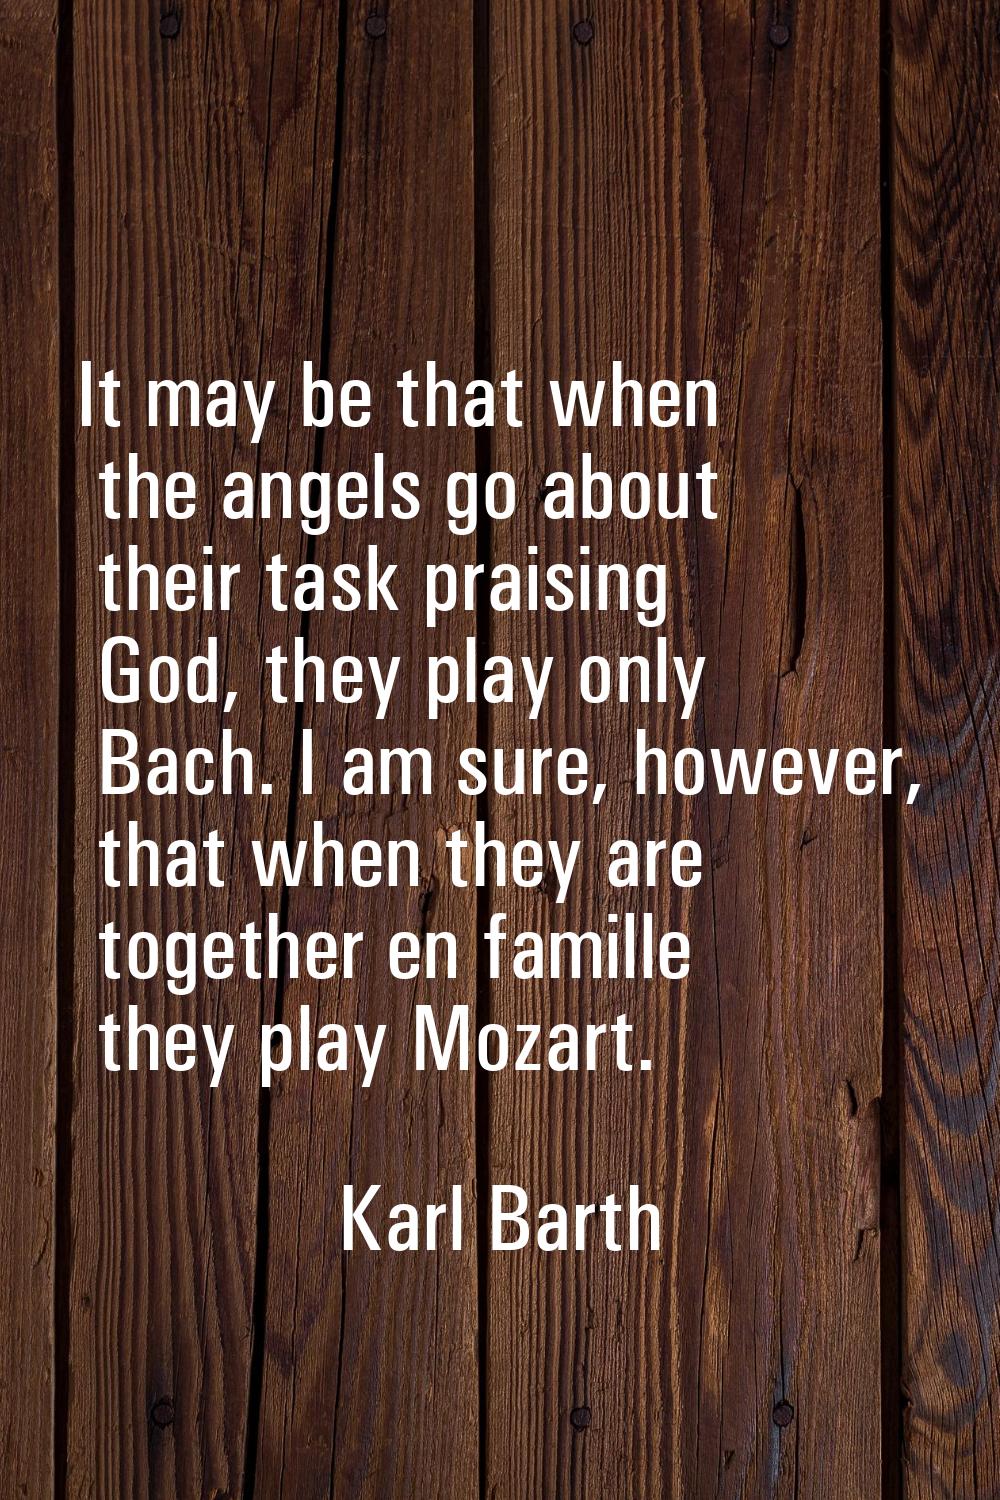 It may be that when the angels go about their task praising God, they play only Bach. I am sure, ho